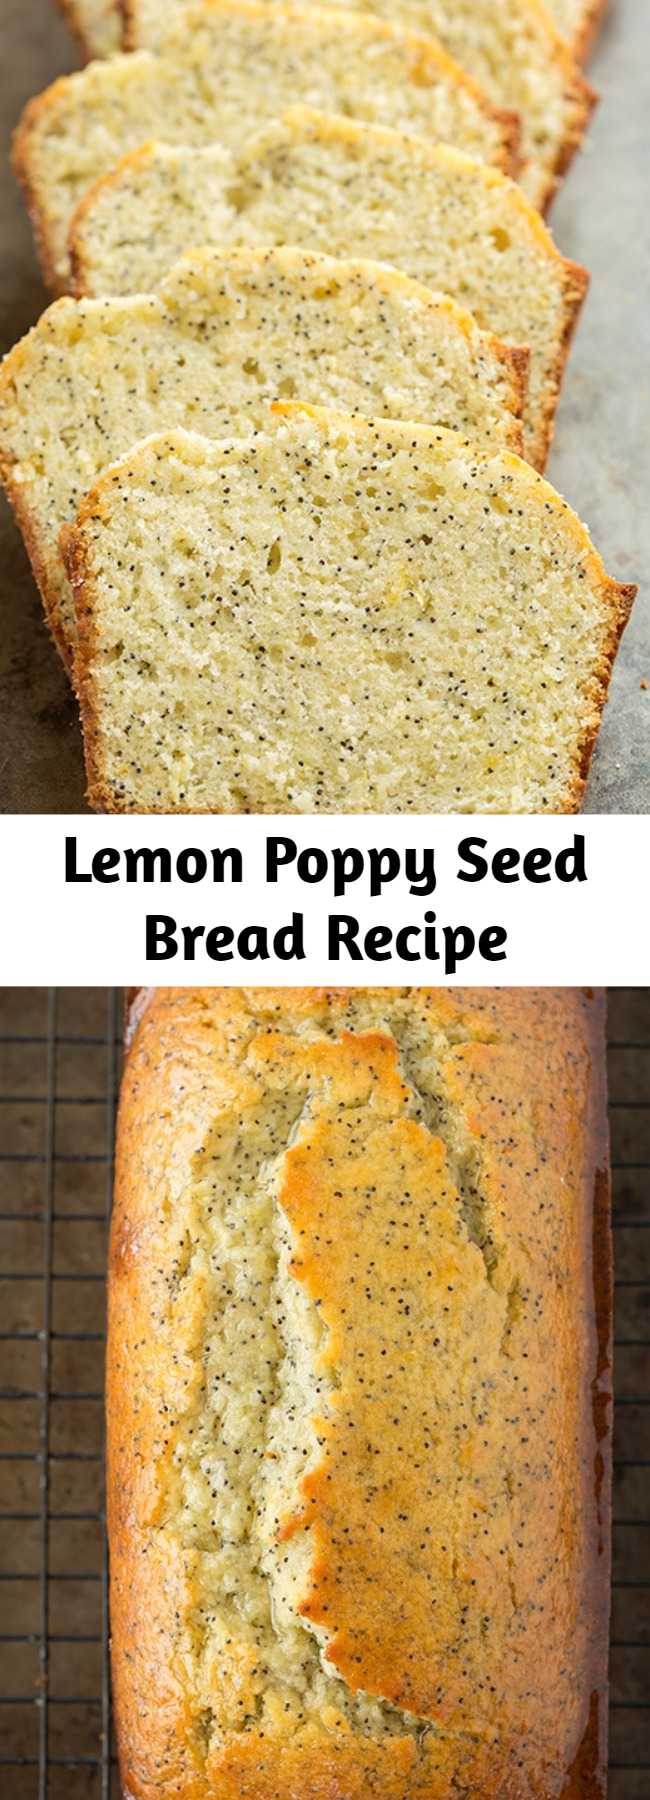 My favorite lemon poppy seed bread! It's brimming with bright lemon flavor, perfectly sweetened and it has a deliciously soft texture. So lemony and delicious!!